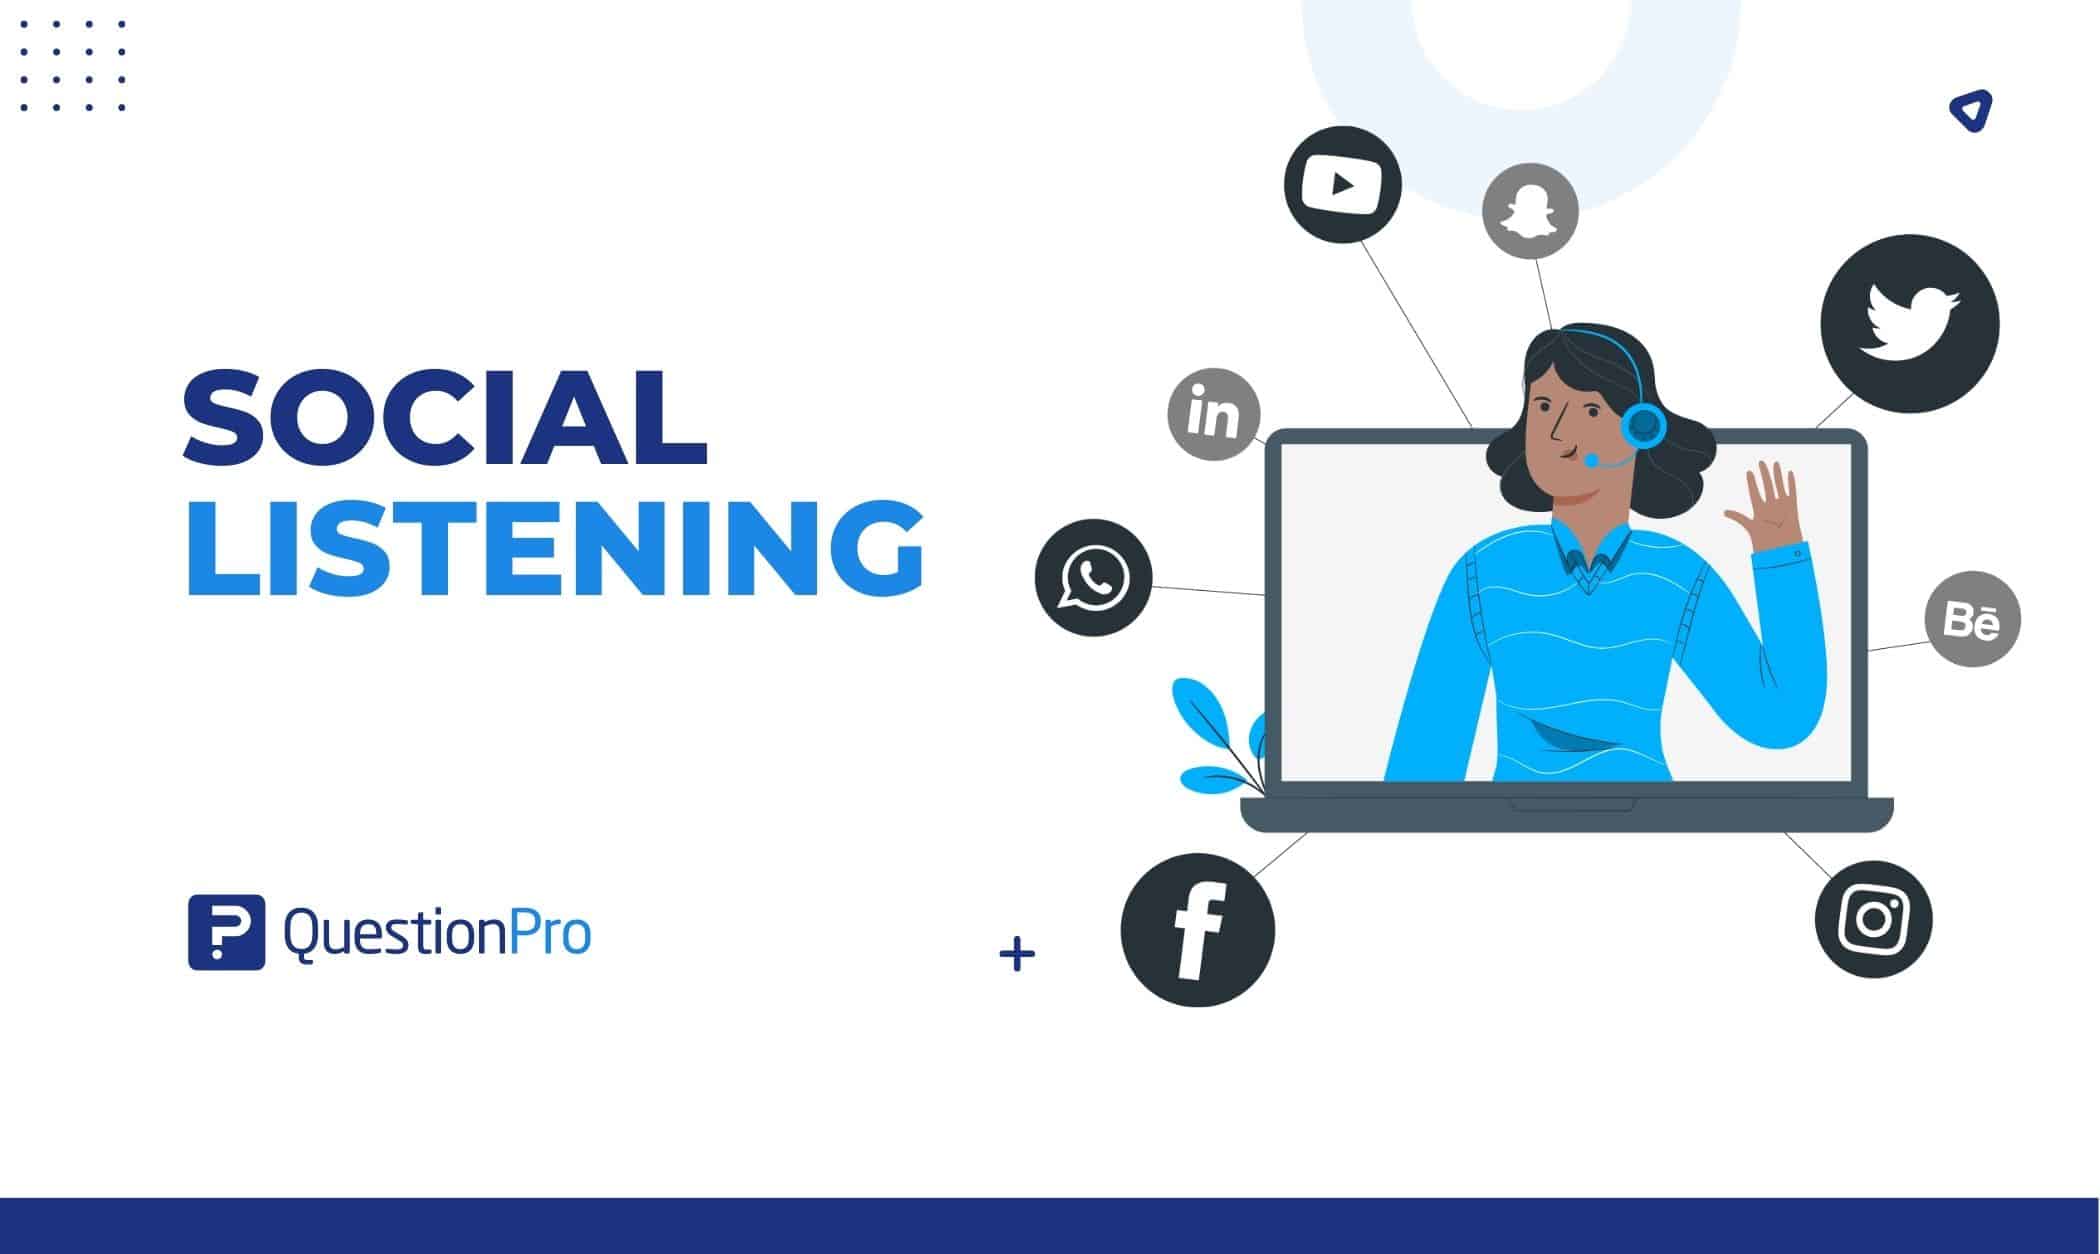 Social listening will assist you in gaining a deeper understanding of how your audience perceives your company and brand. Find out more.